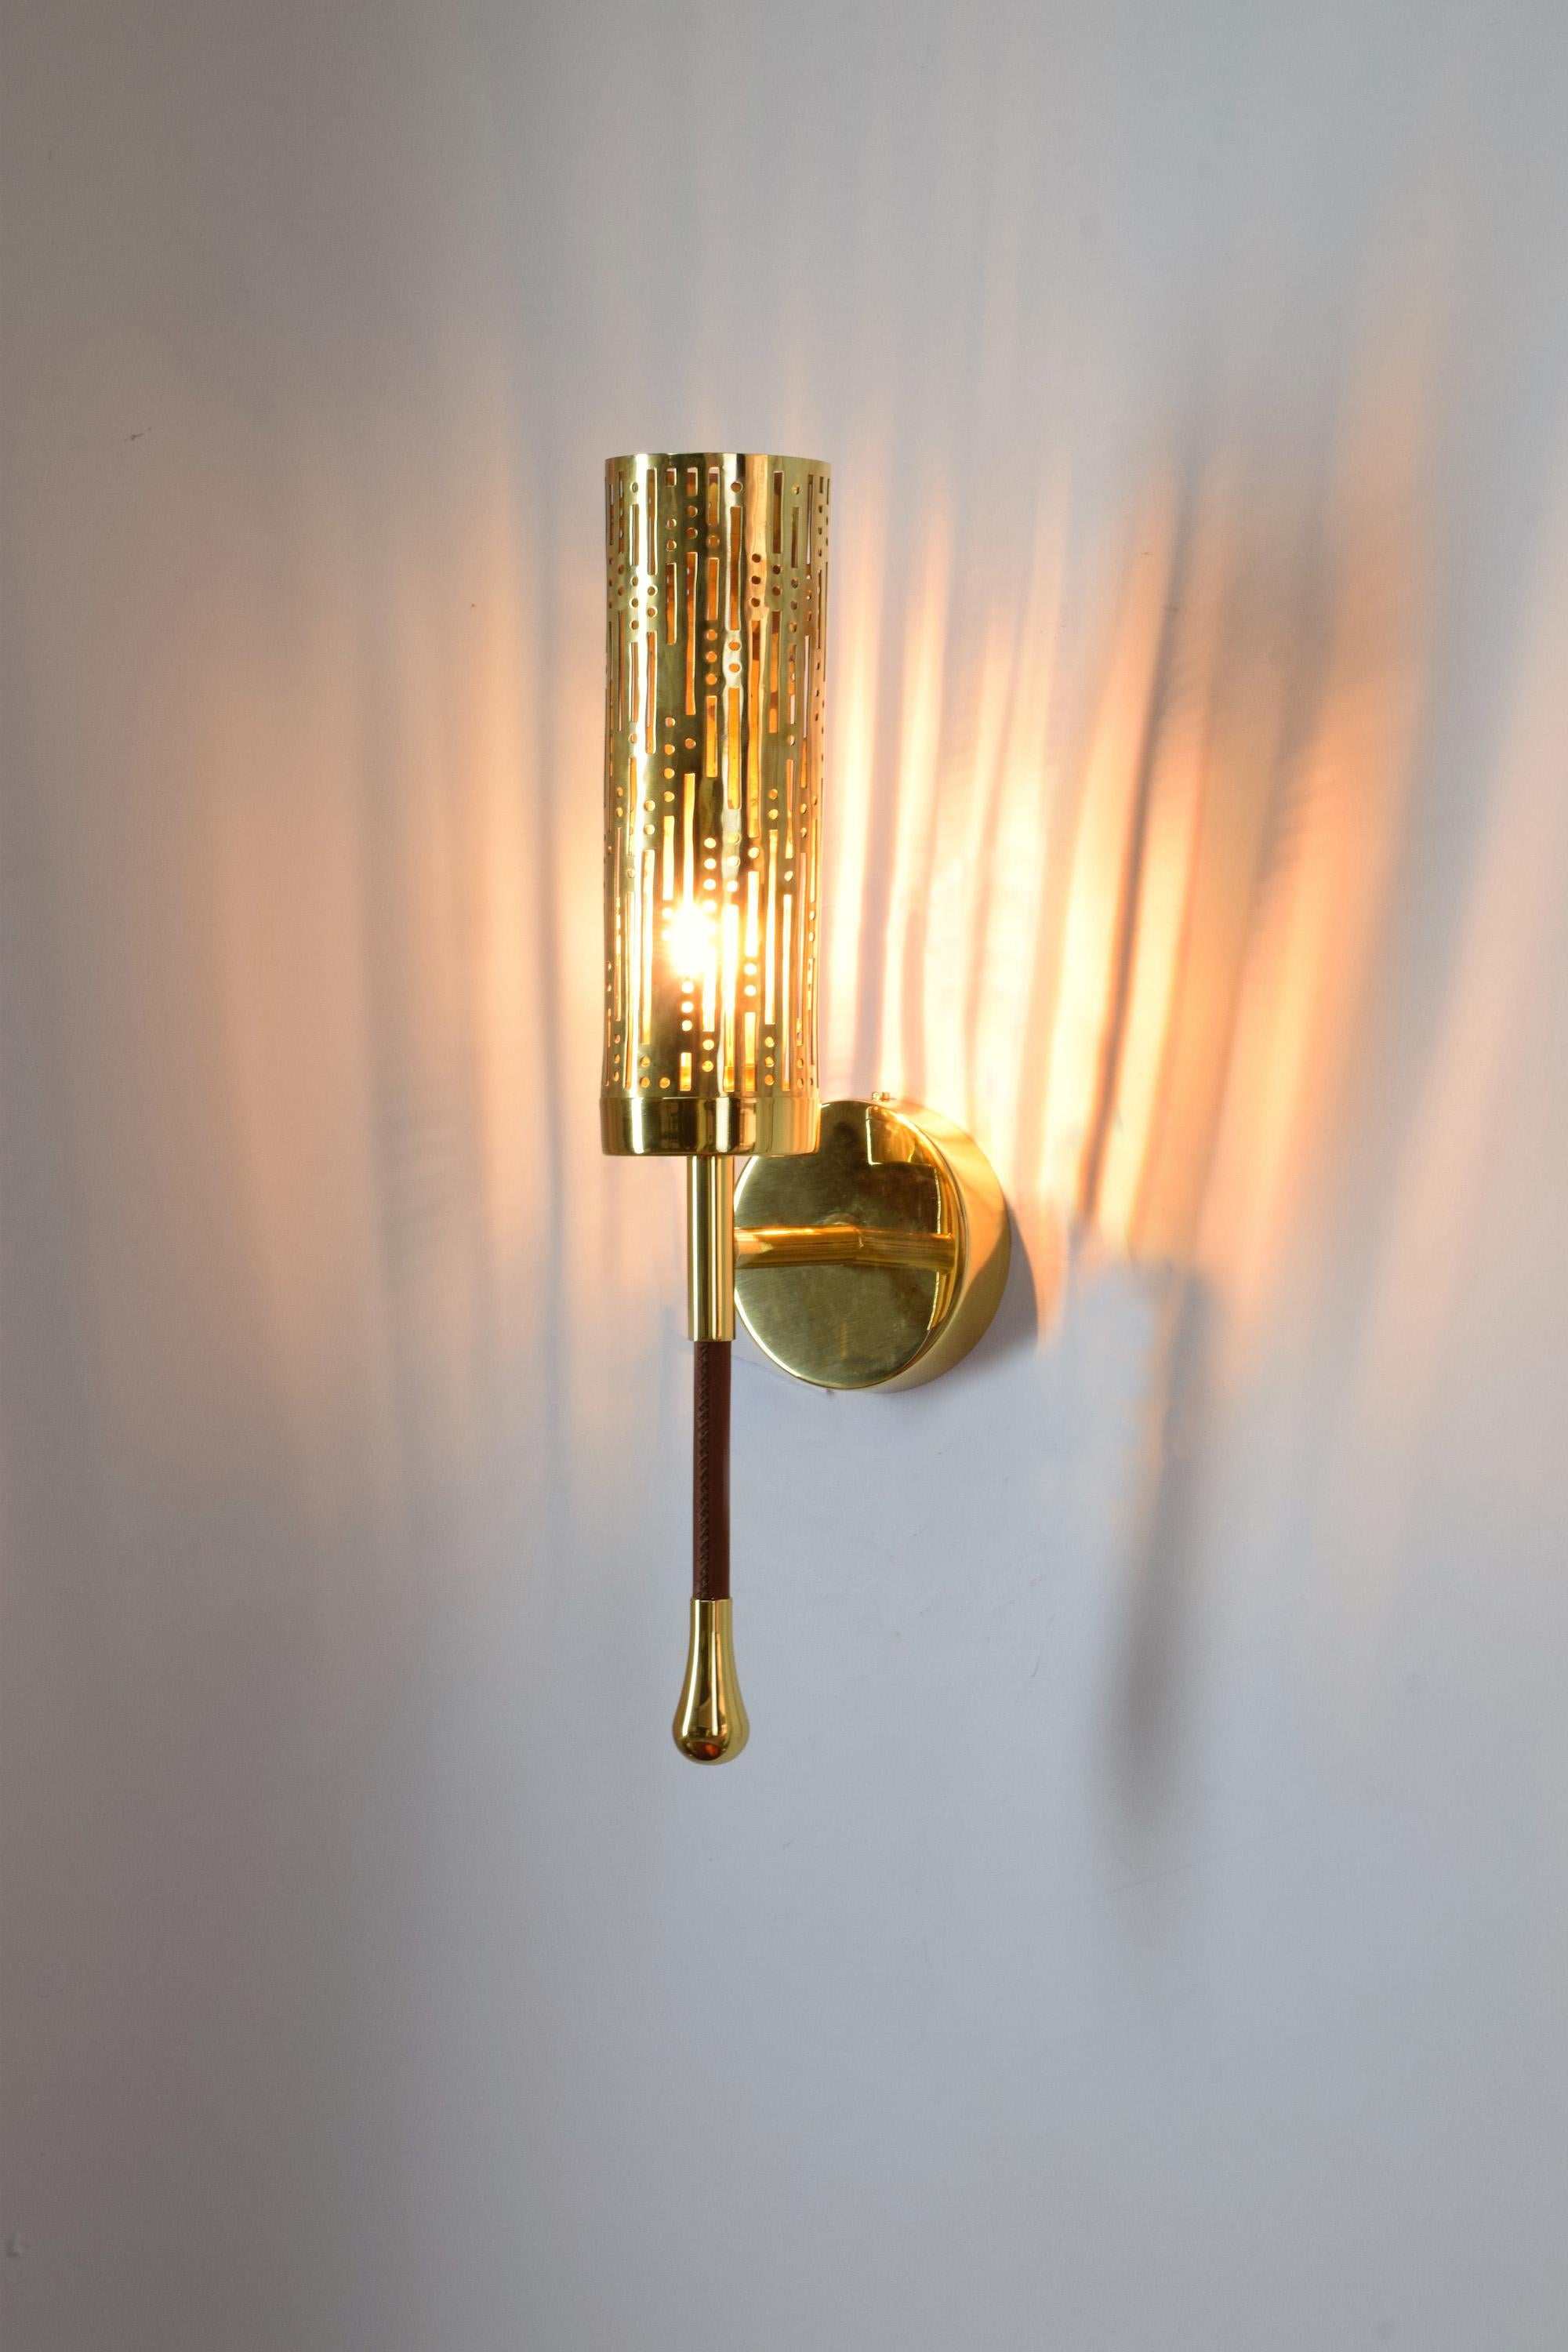 Daya-w1m2 Openwork Brass Wall Light, Flow 2 Collection In New Condition For Sale In Paris, FR